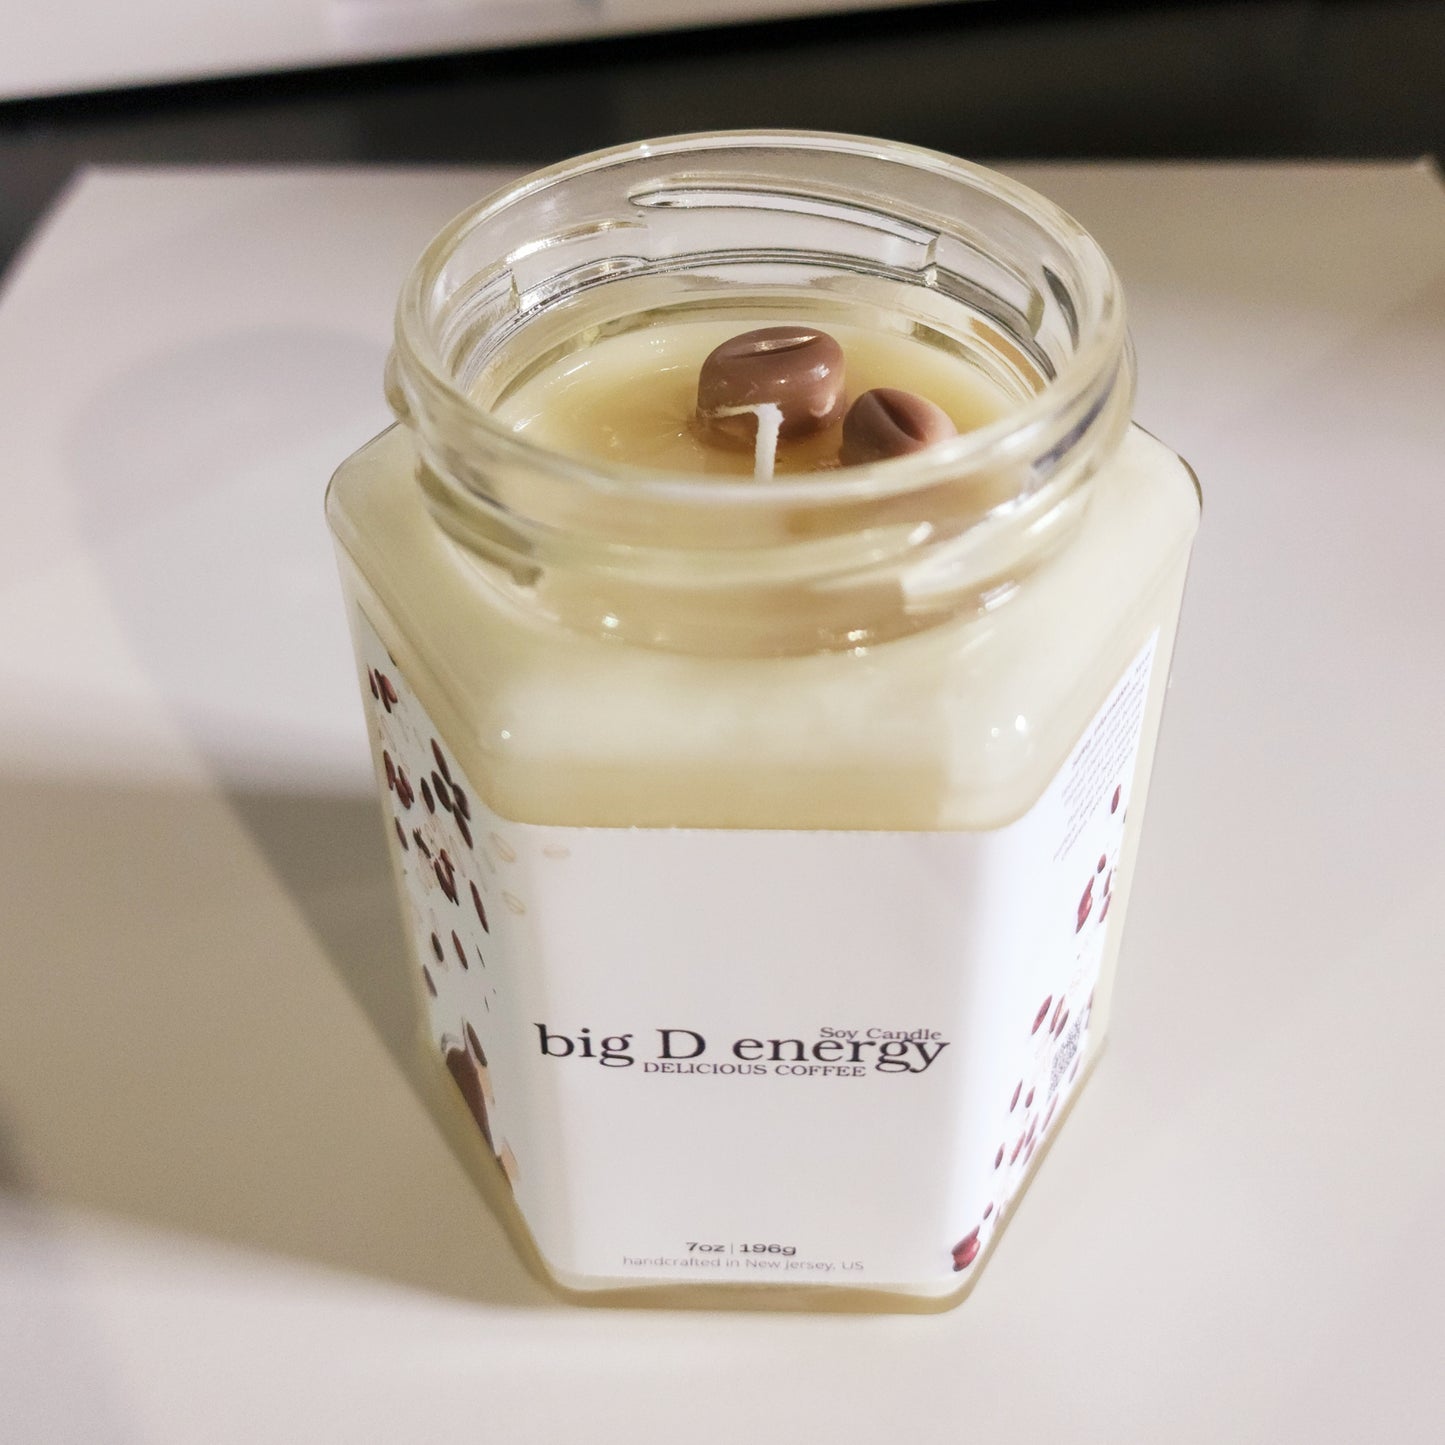 big D energy DELICIOUS COFFEE Soy Candle | Large Hex Jar